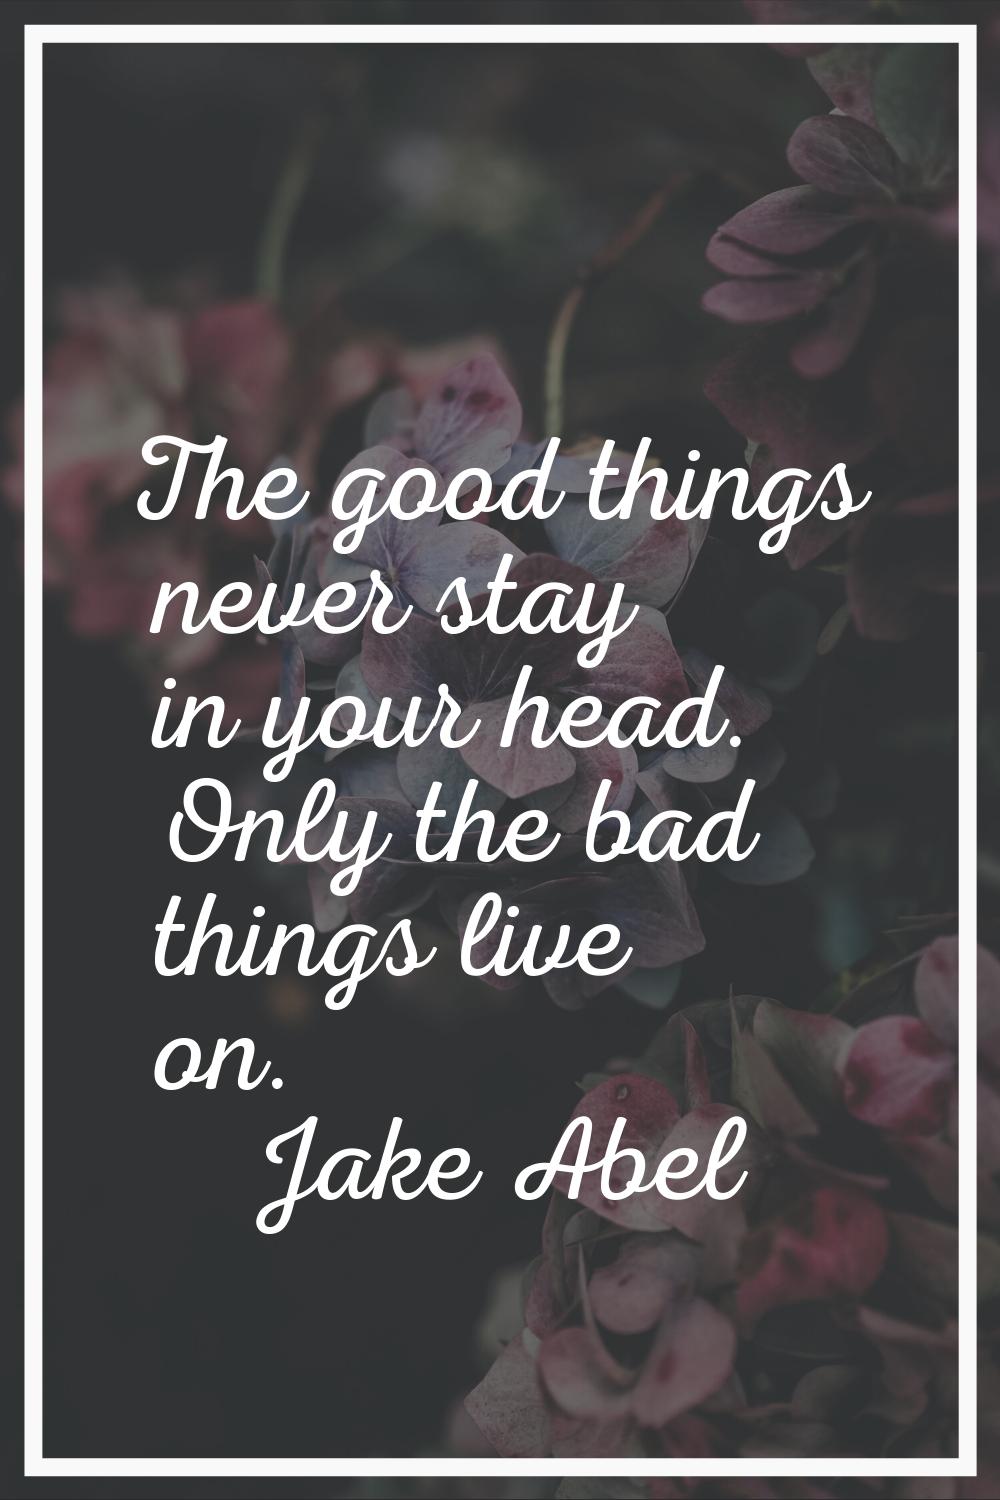 The good things never stay in your head. Only the bad things live on.